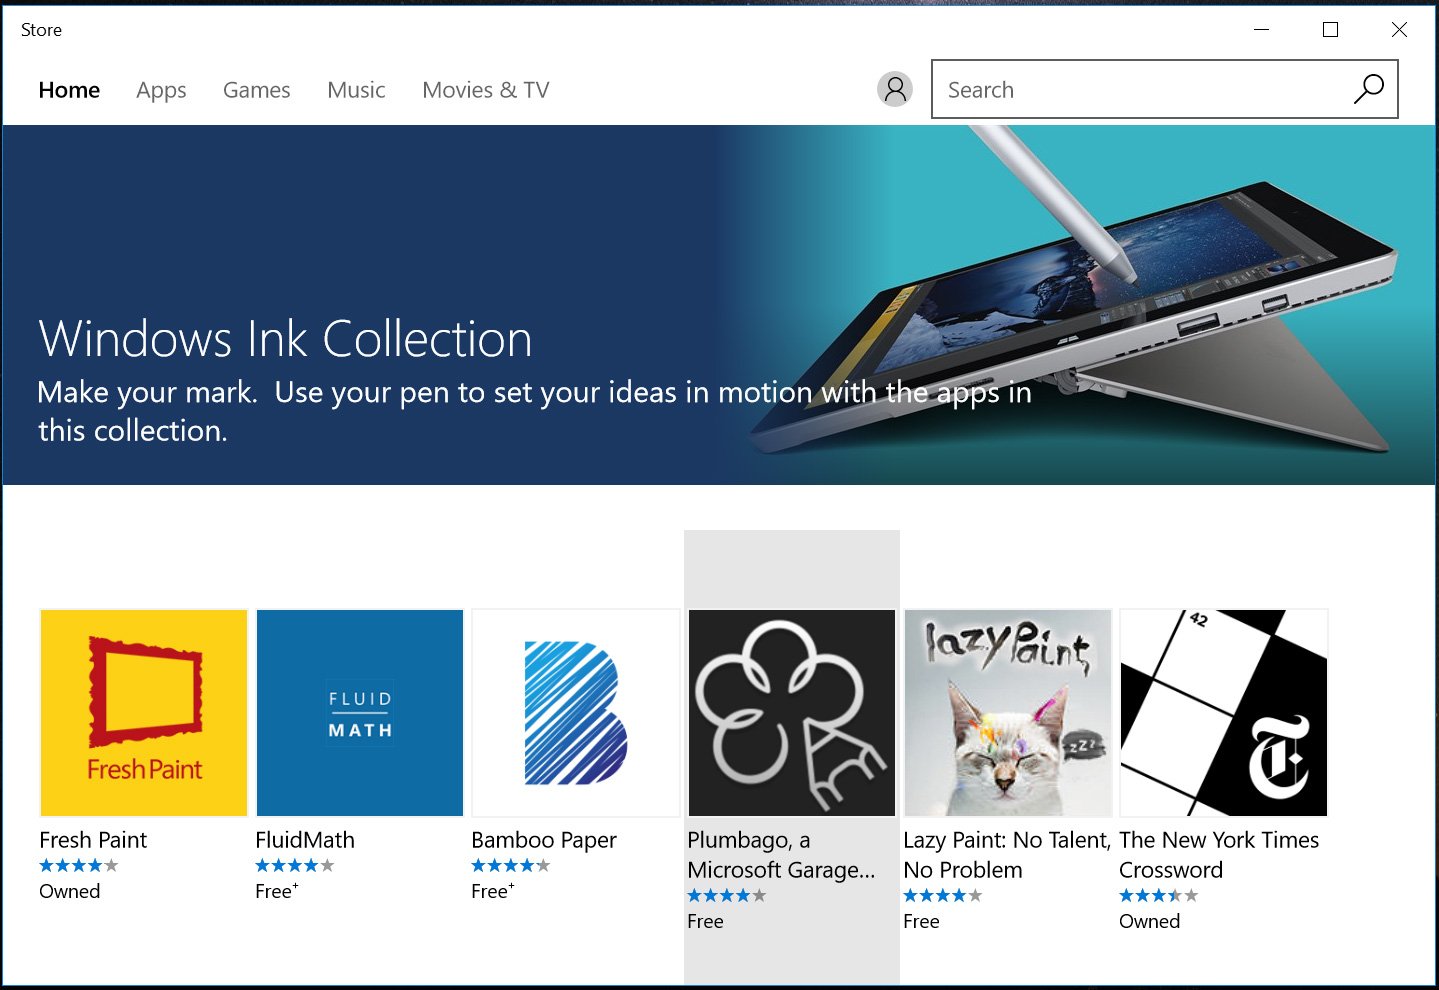 Windows Ink Collection